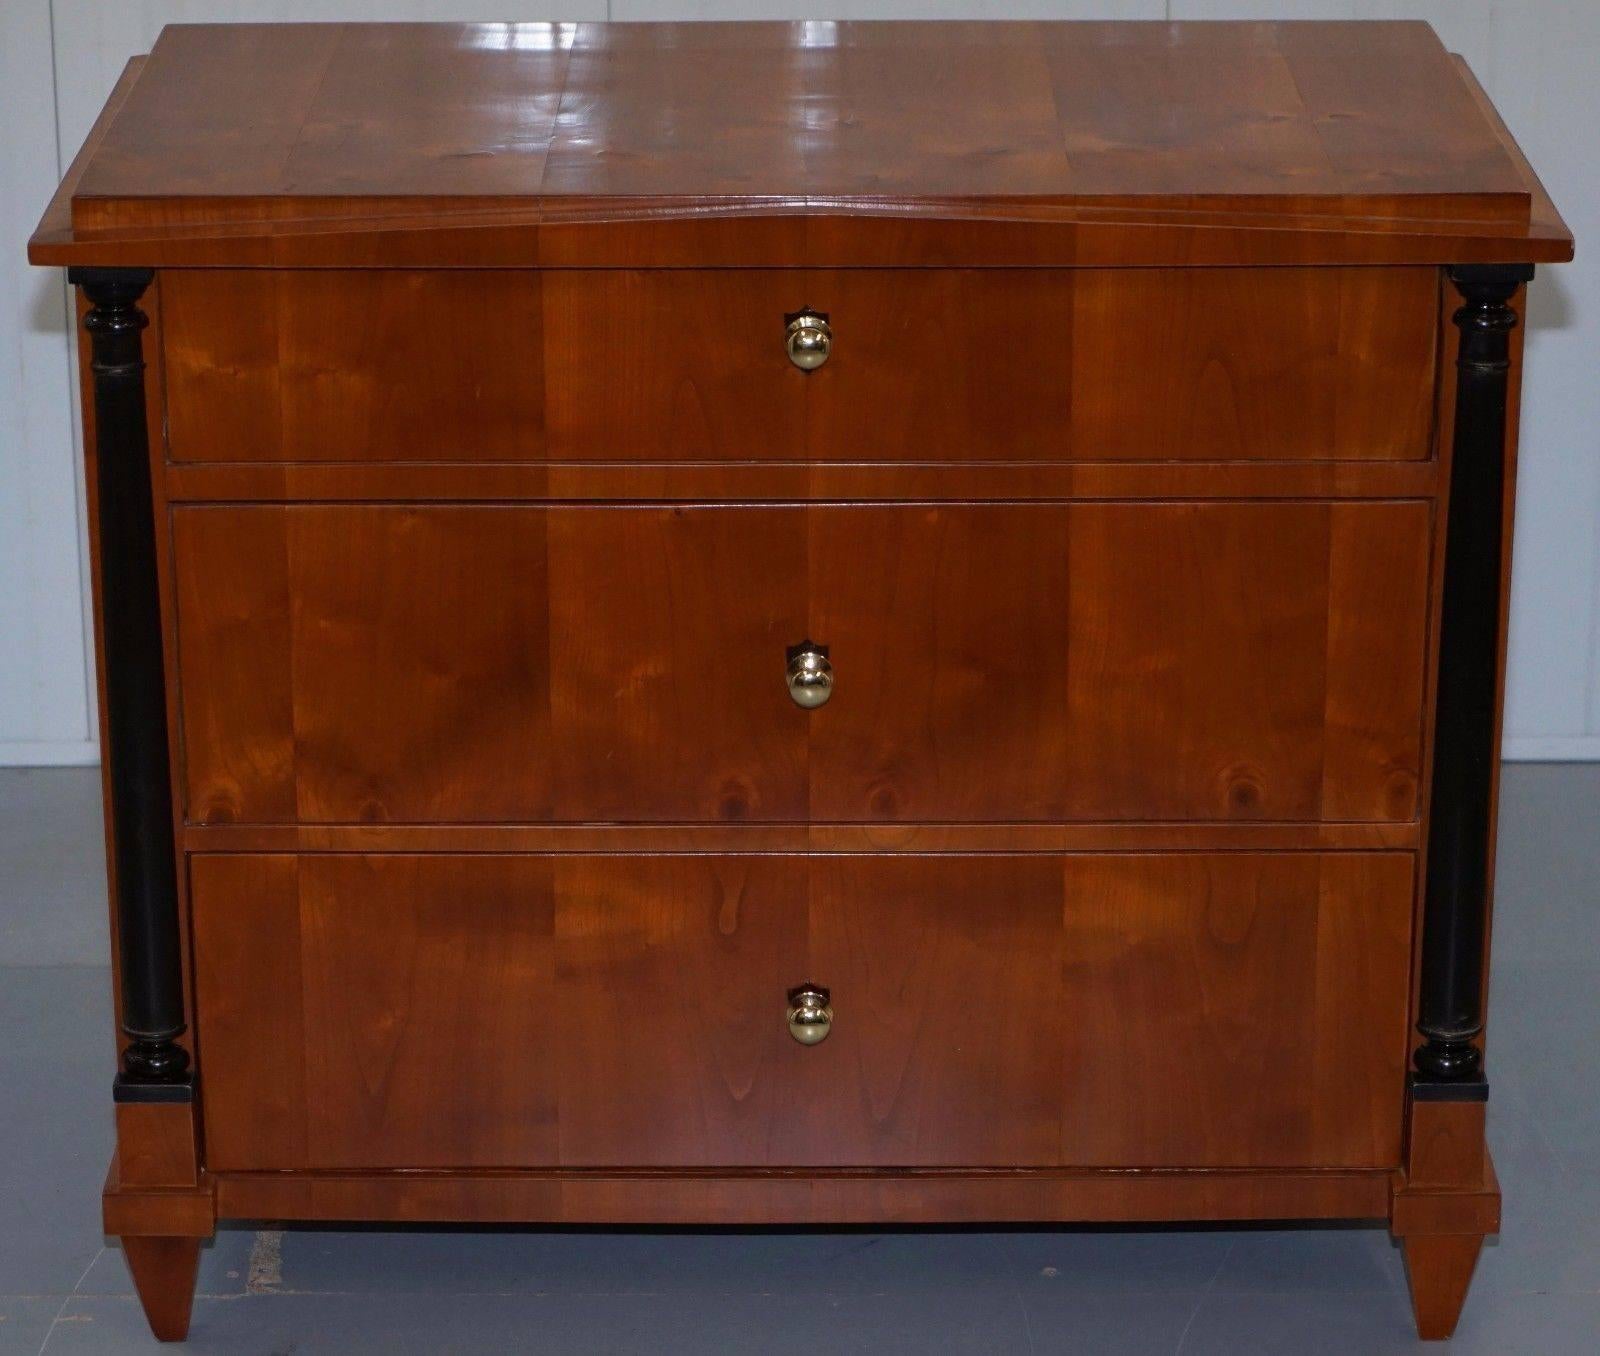 We are delighted to offer for sale this lovely Swedish Biedermeier cherry wood chest of drawers circa 1850

Please note the delivery fee listed is just a guide, for an accurate quote please send me your postcode and I’ll price it up for you

A